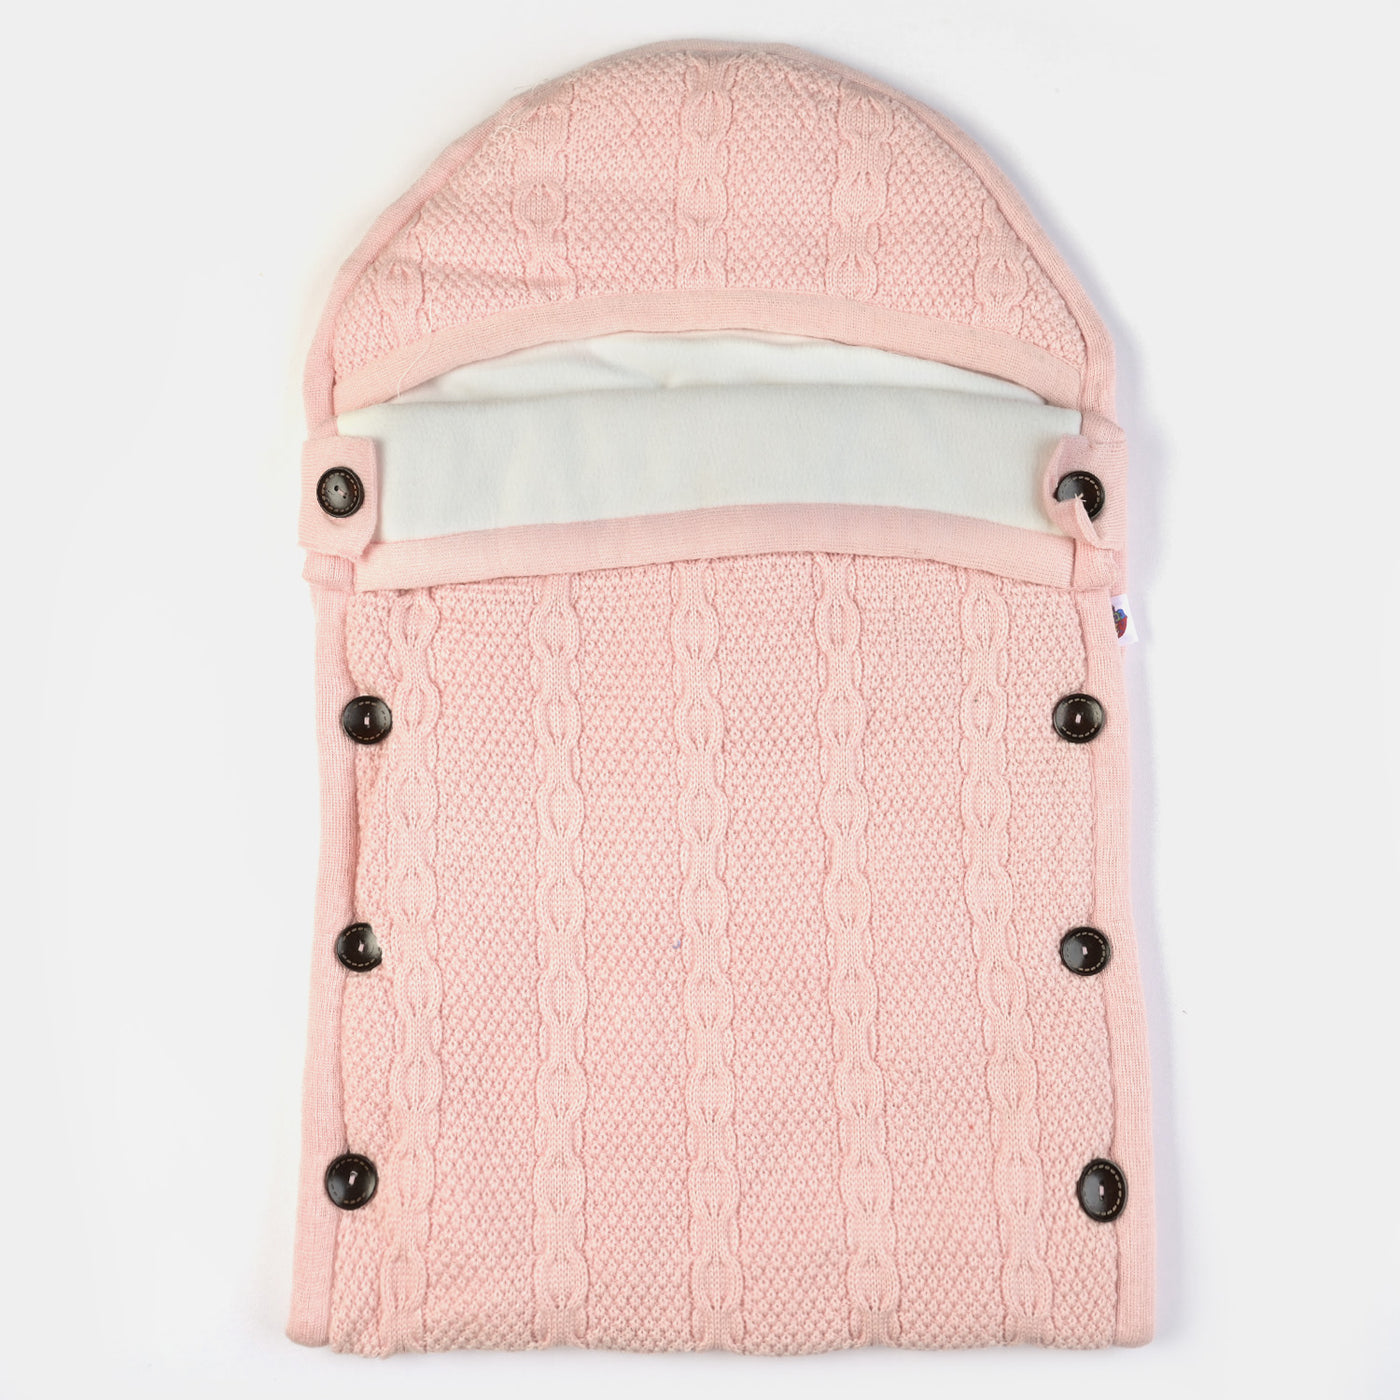 Infant Baby Woolen Carry Nest - Pink